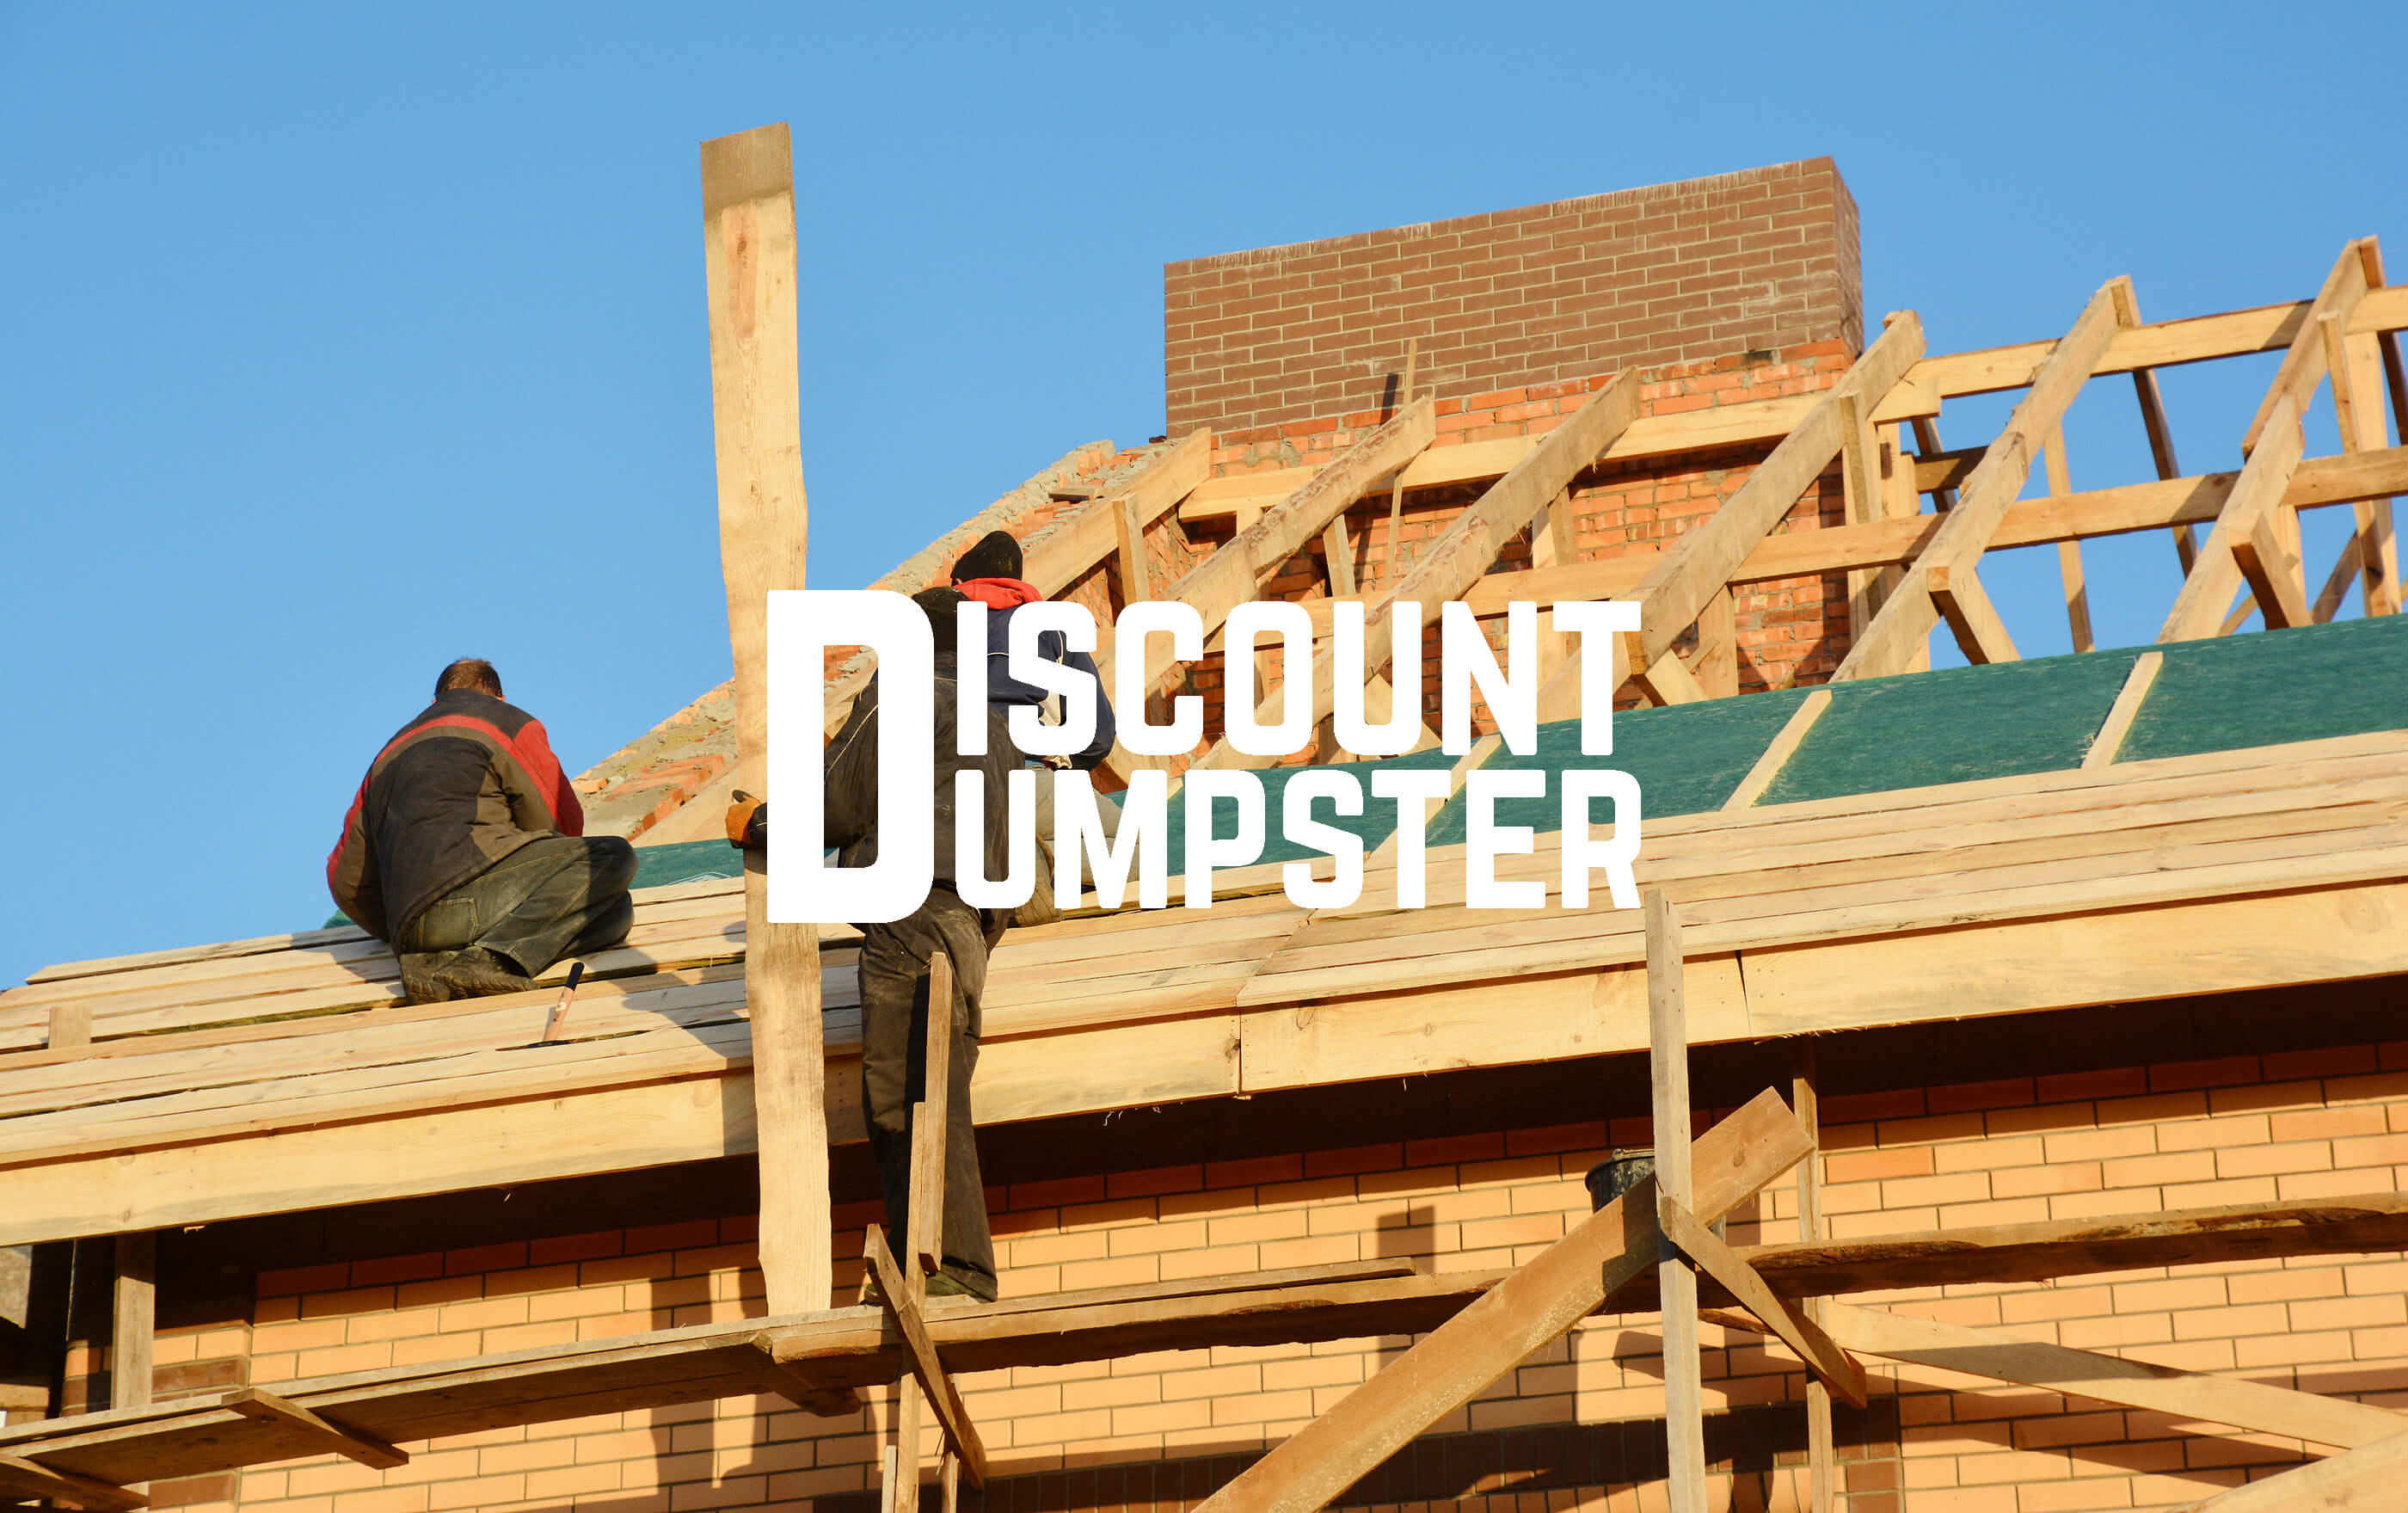 Discount dumpster takes care of removing all your construction waste in Denver co